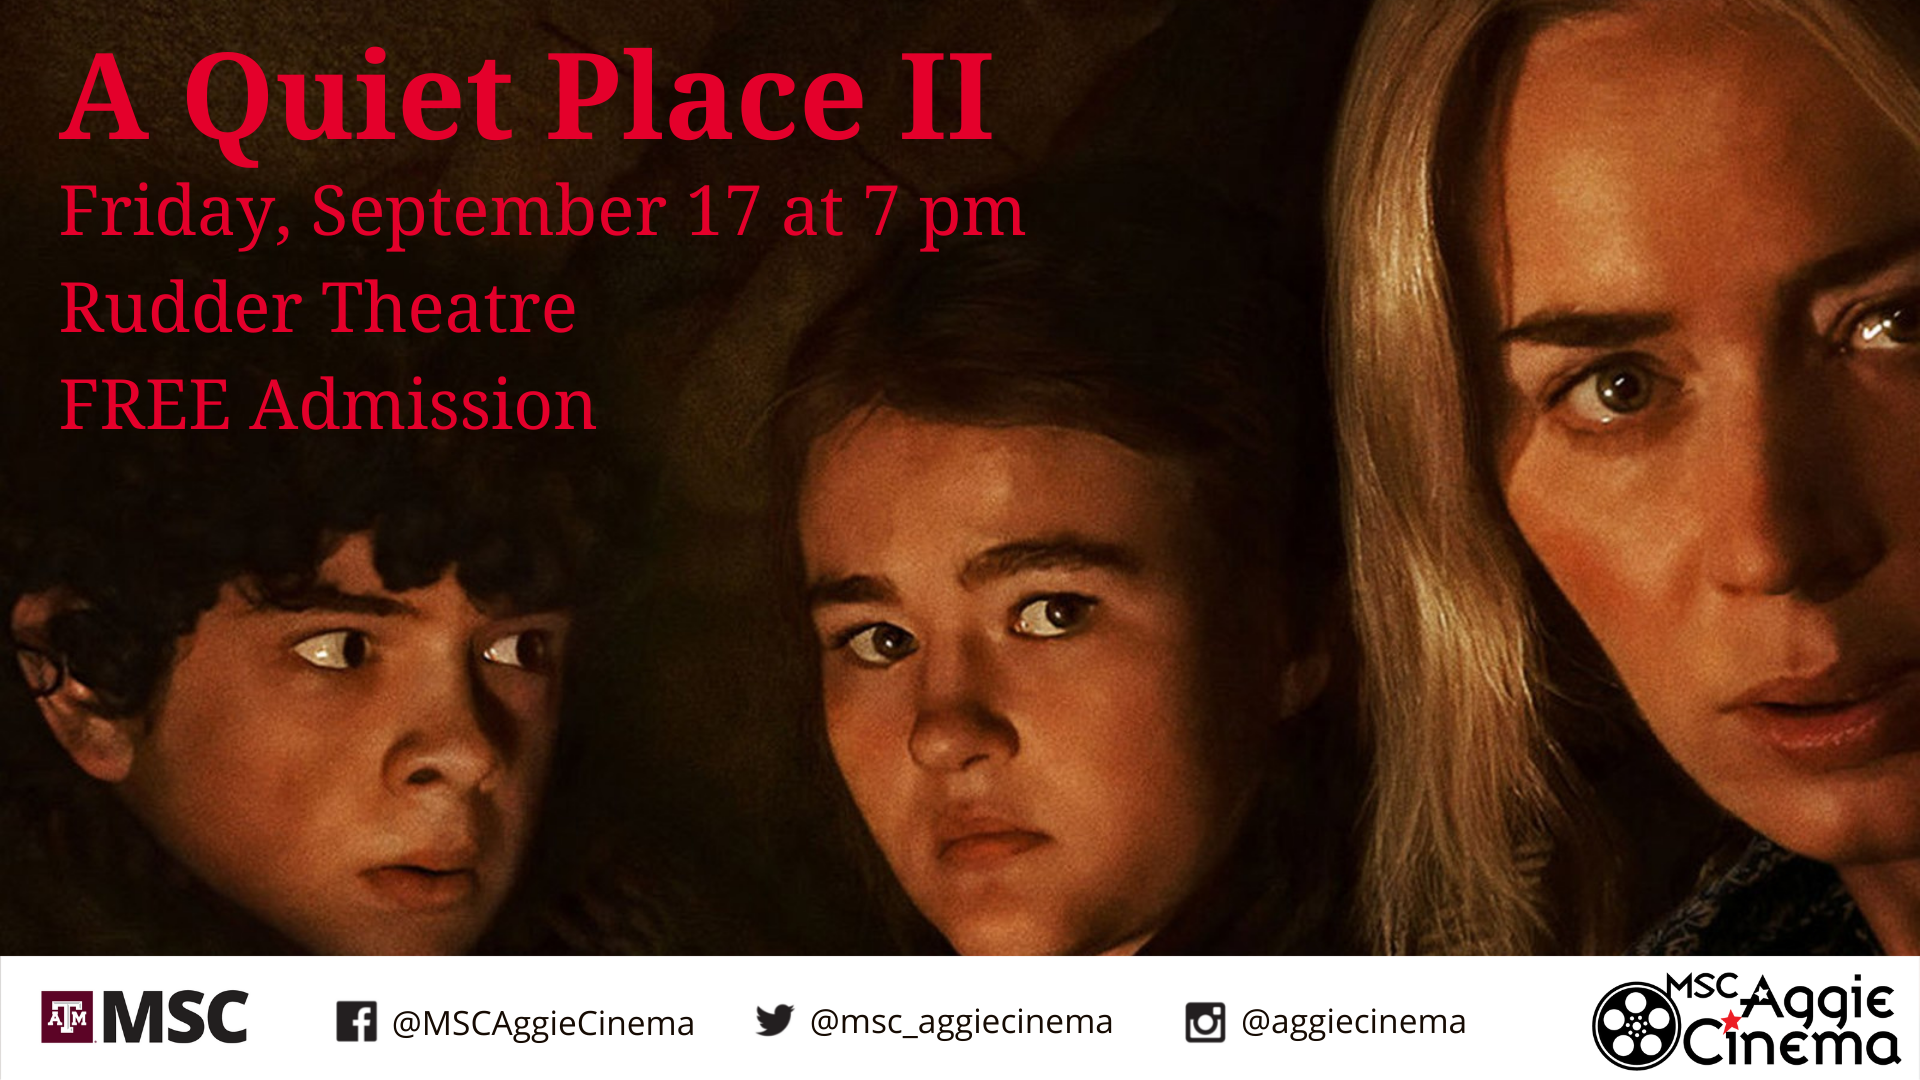 MSC Aggie Cinema presents A Quiet Place II on September 17, 2021 at 7 pm in Rudder Theatre